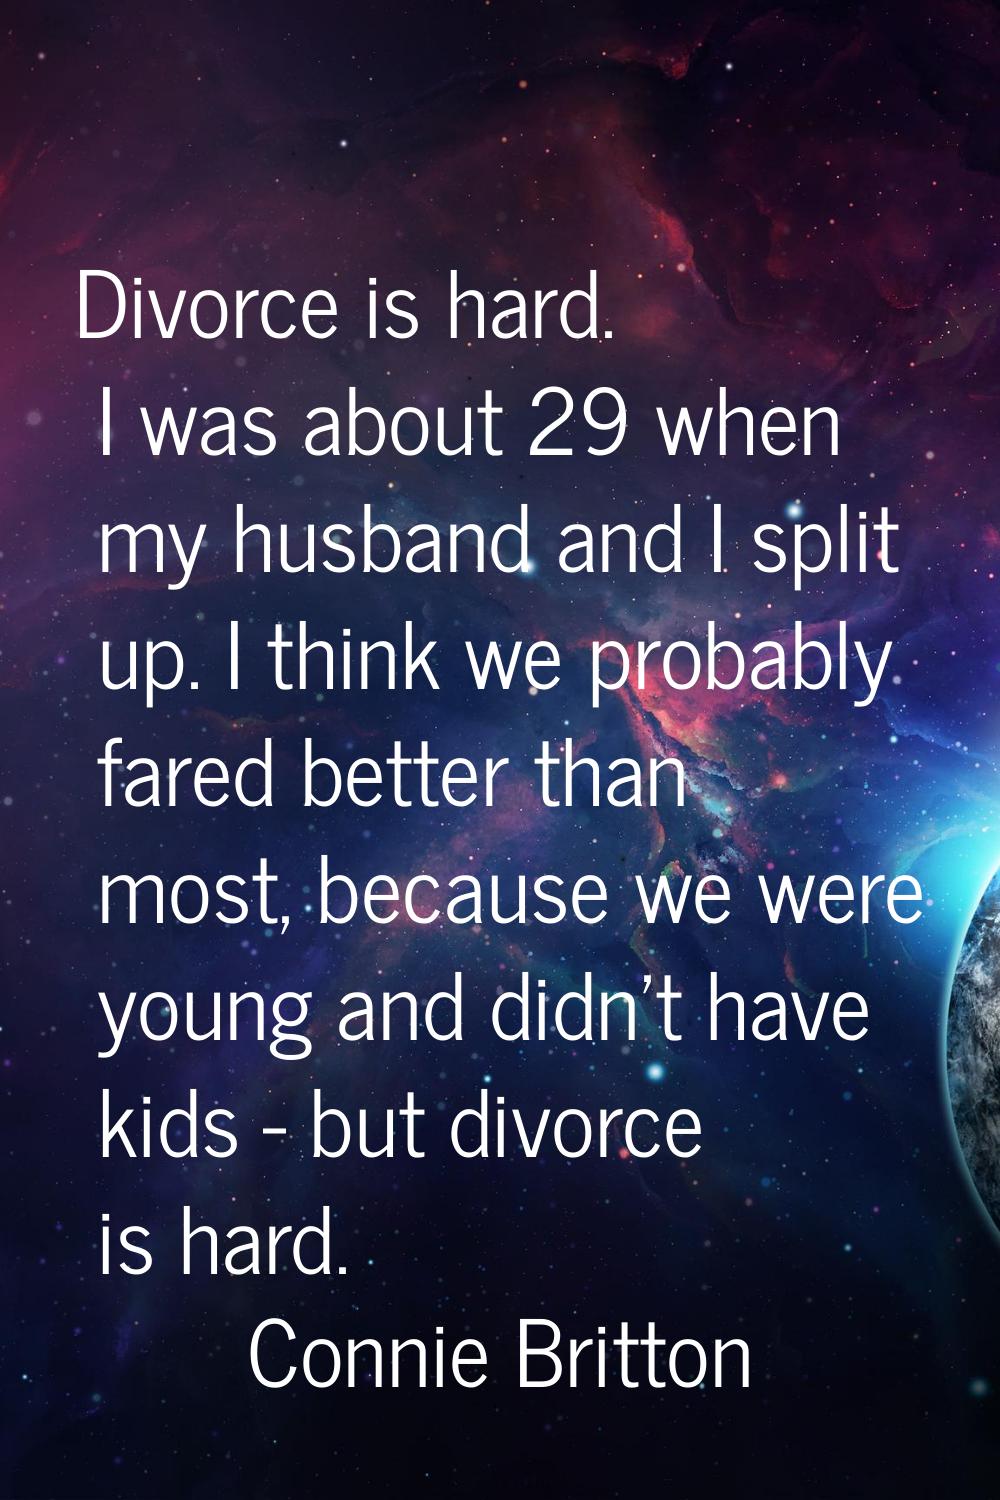 Divorce is hard. I was about 29 when my husband and I split up. I think we probably fared better th